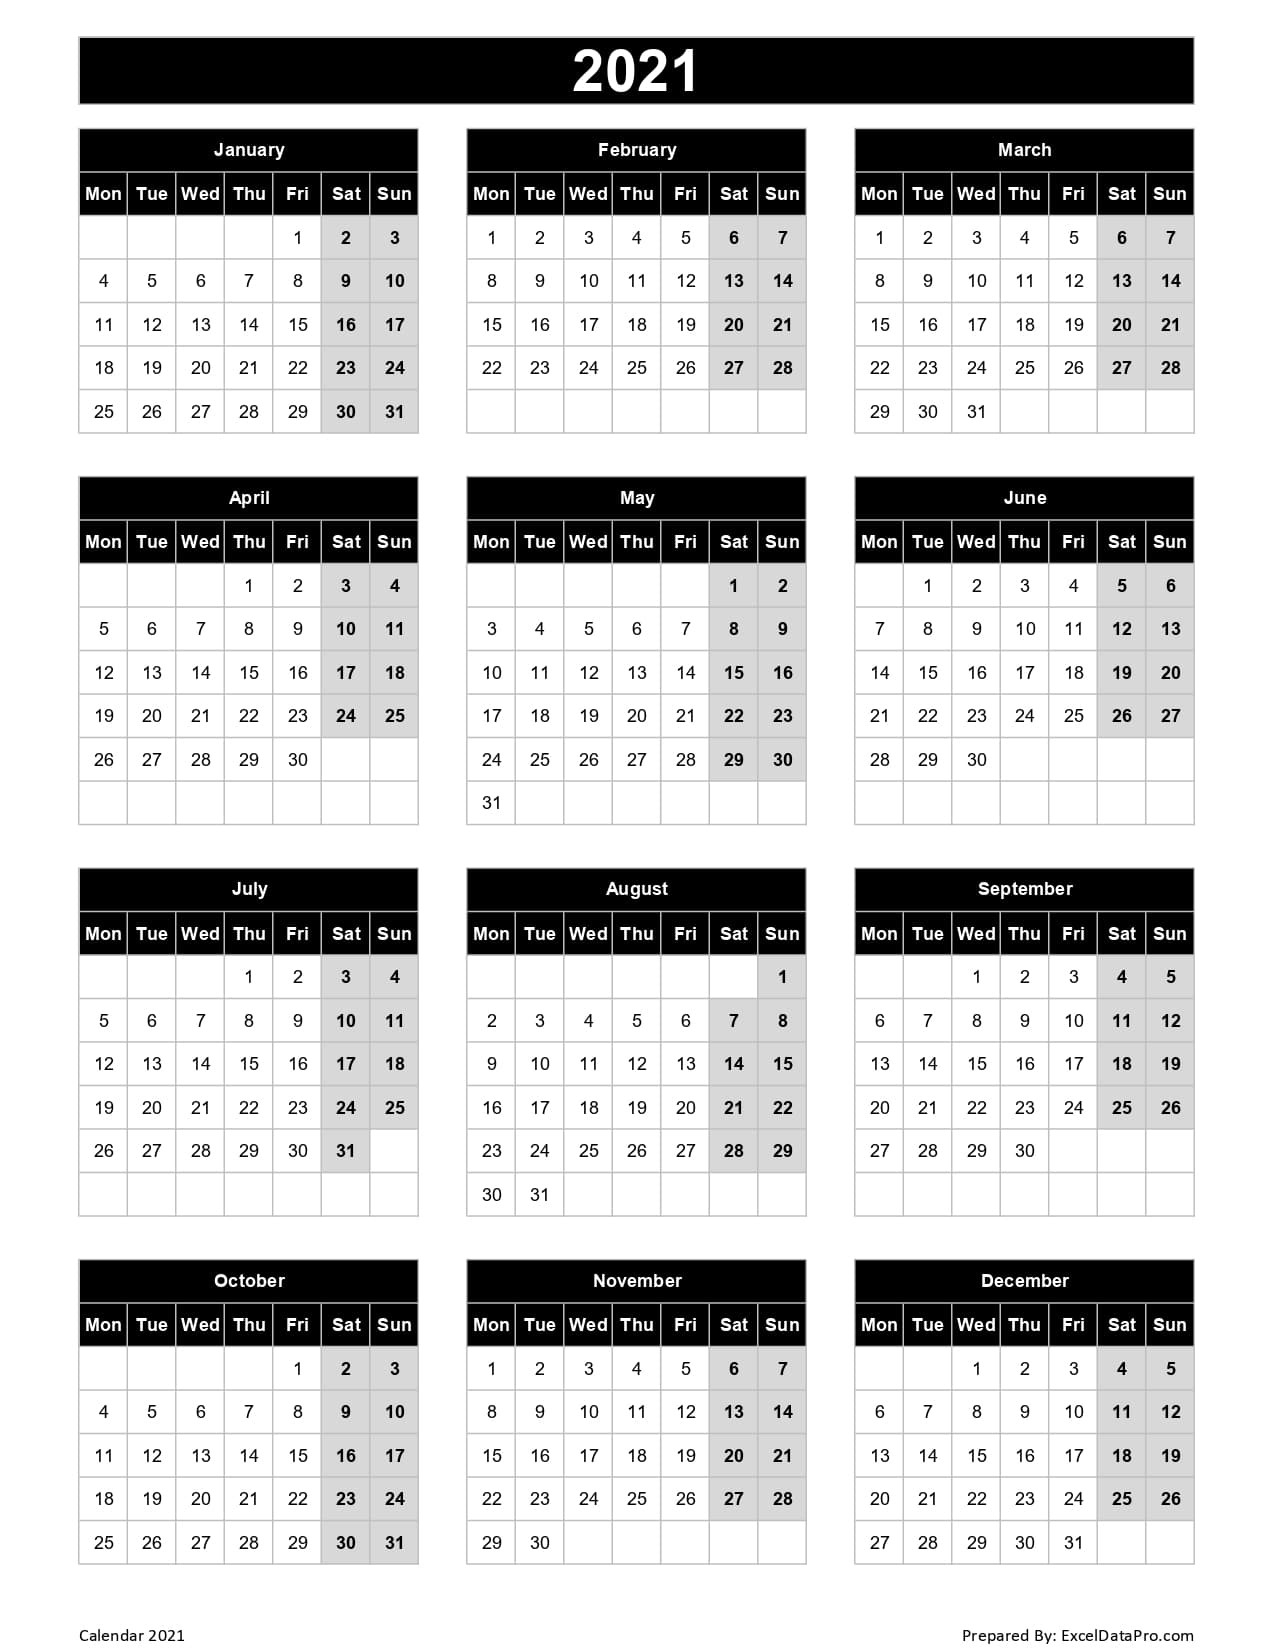 Download 2021 Yearly Calendar (Mon Start) Excel Template - Exceldatapro-2021 Monthly Fill In Calendars